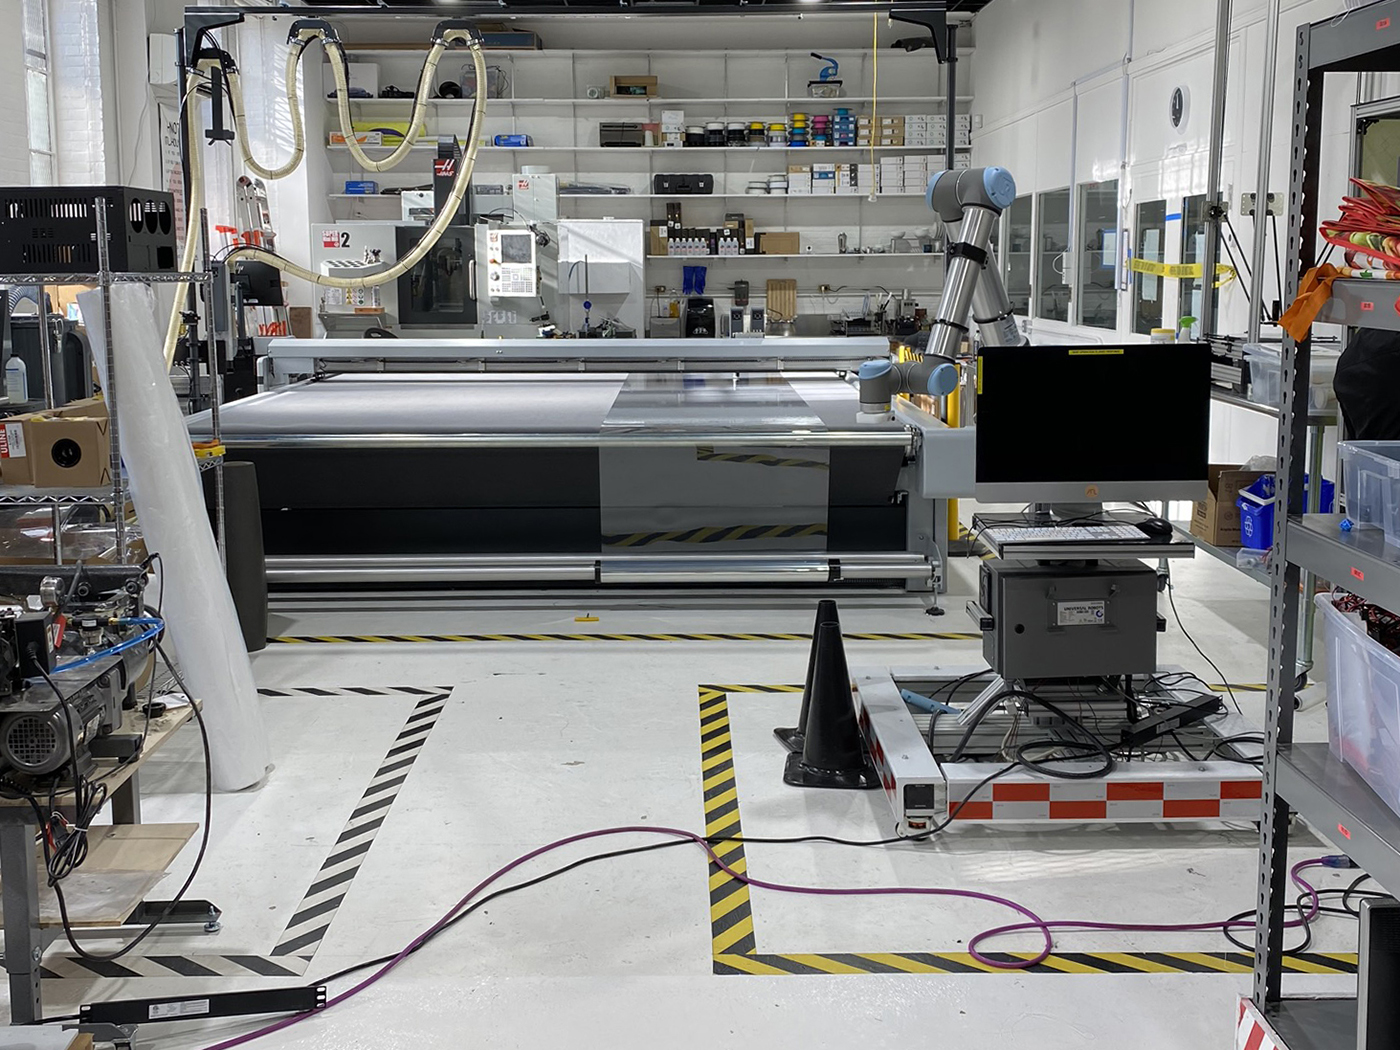 Roll feed setup with the Zünd digital cutter for the non-stop automatization of cutting shields for attachment to a 3D-printed visor (photo by Scott Sorenson)